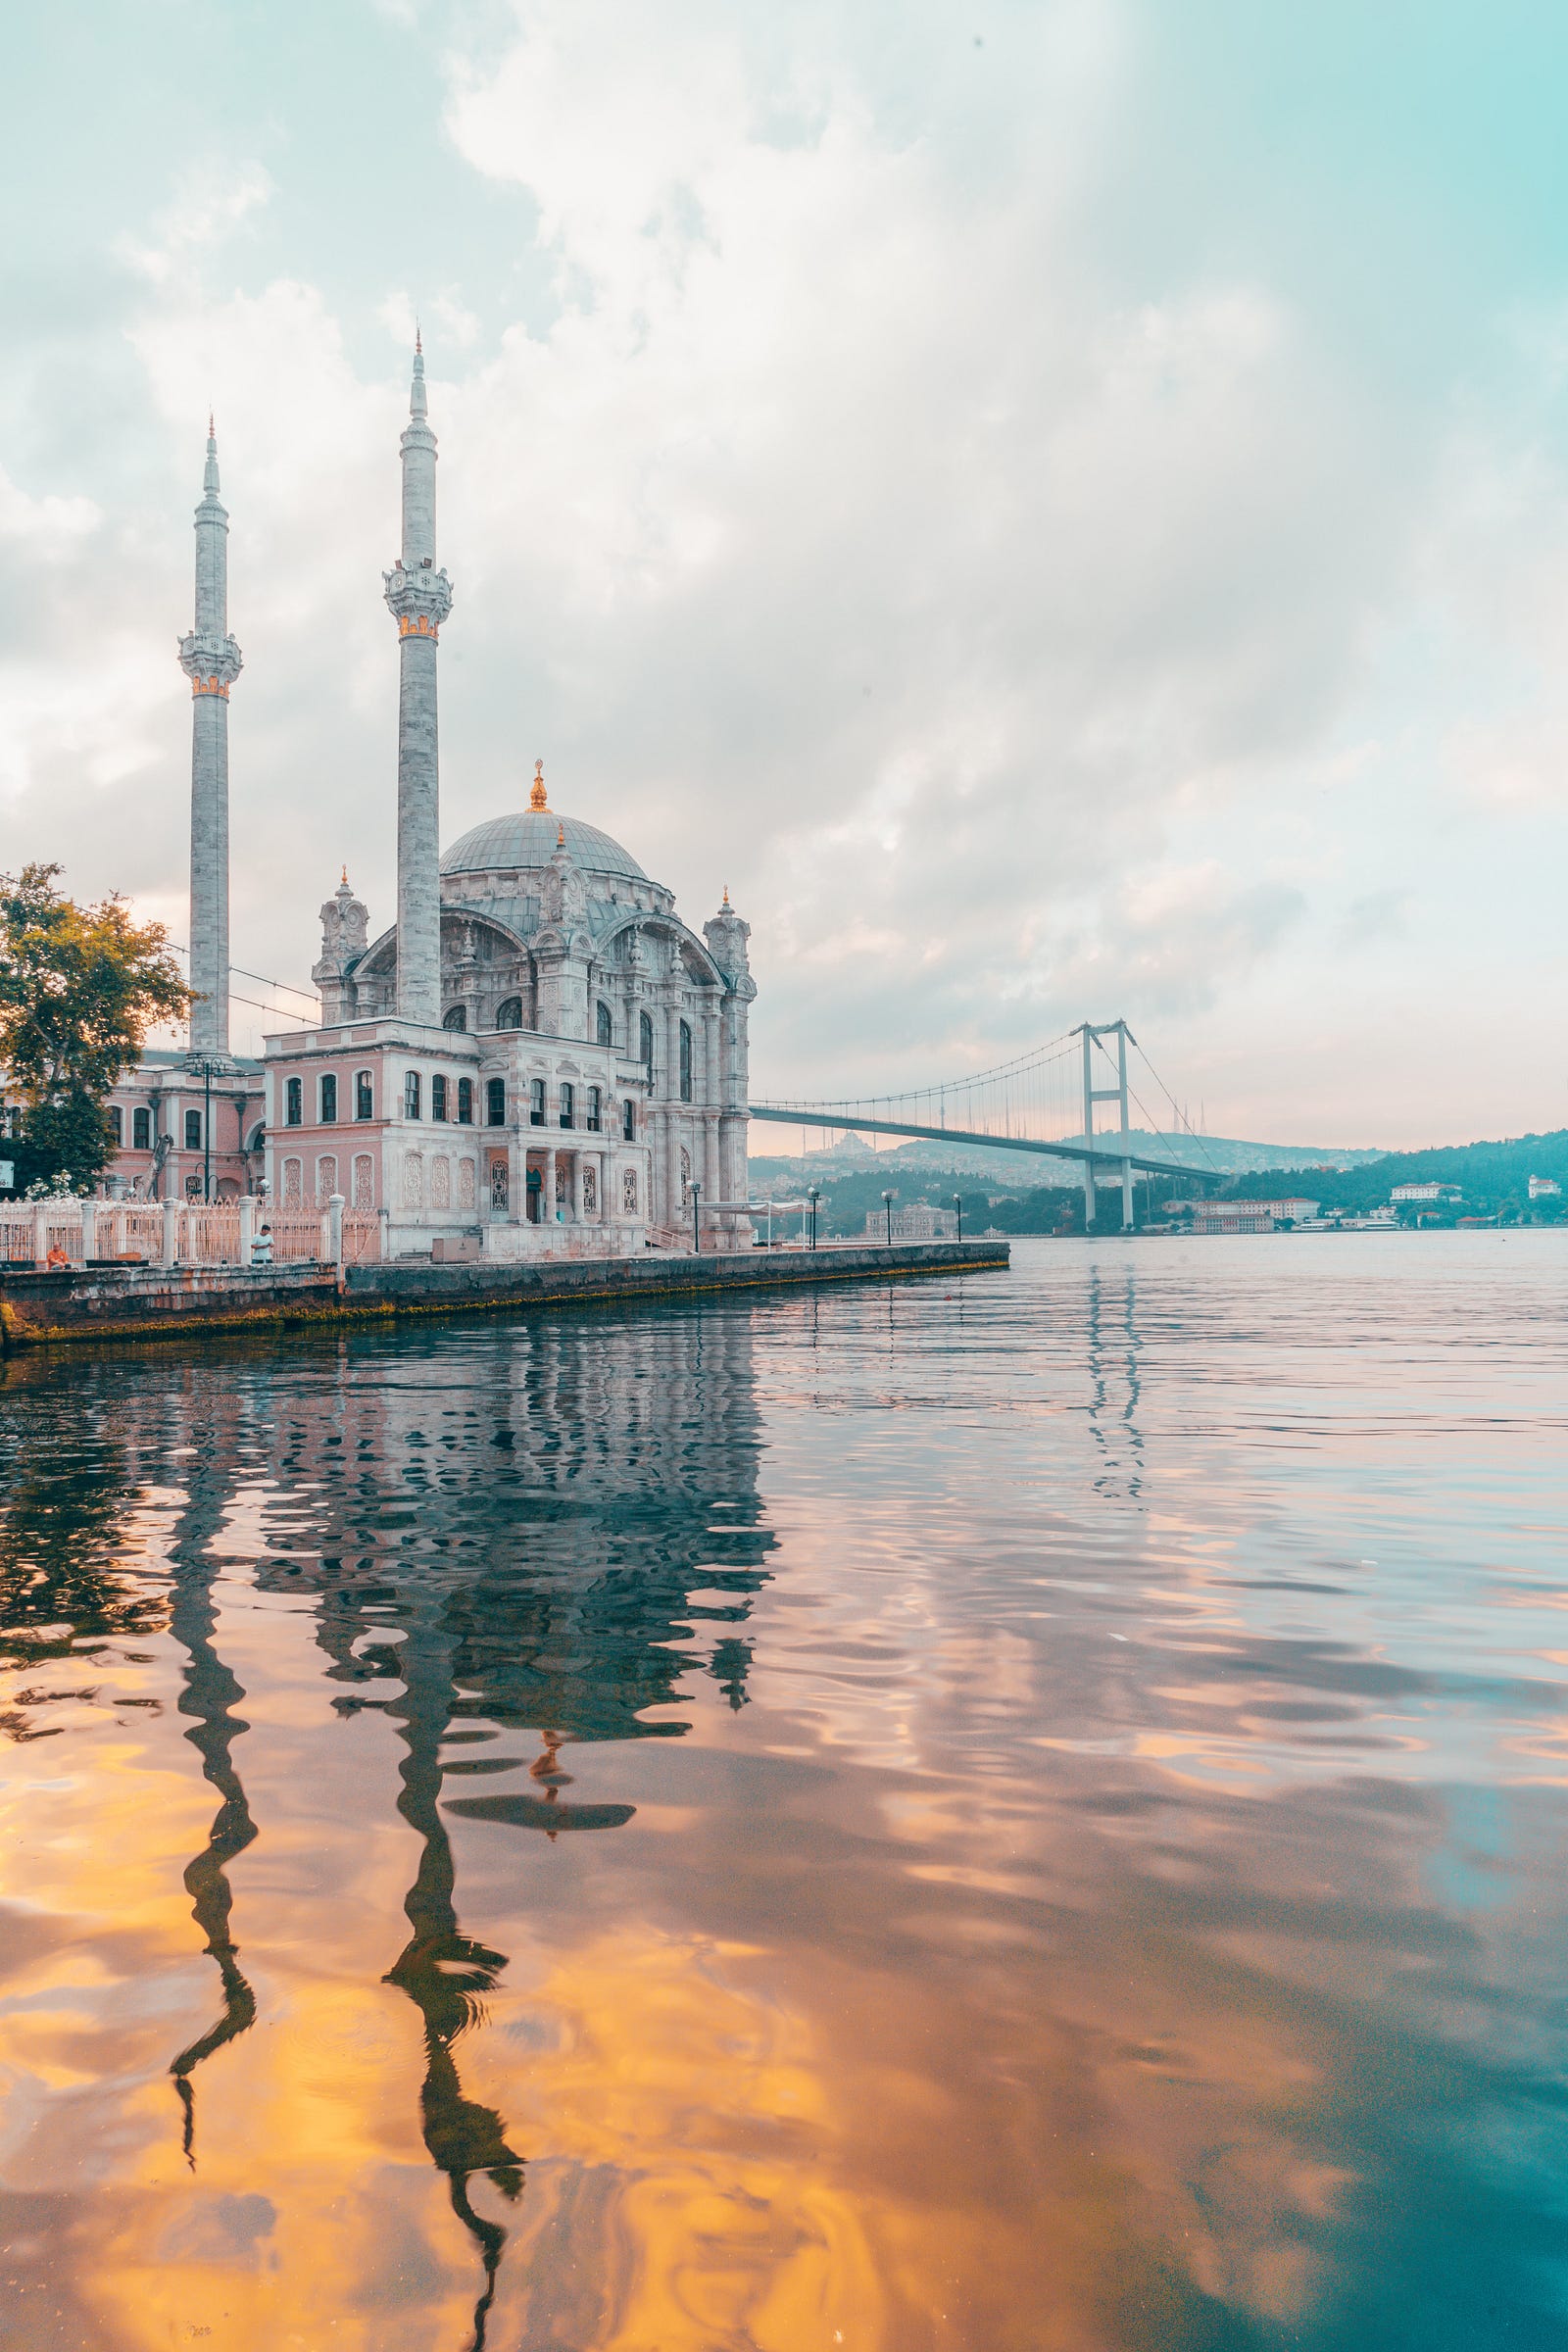 An historic waterfront building in Istanbul. Dr. Robert Waldinger, a professor of psychiatry at Harvard Medical School, explained to Men’s Journal that talking with strangers gives us little hits of energy and well-being by helping us feel connected to the world like we belong.